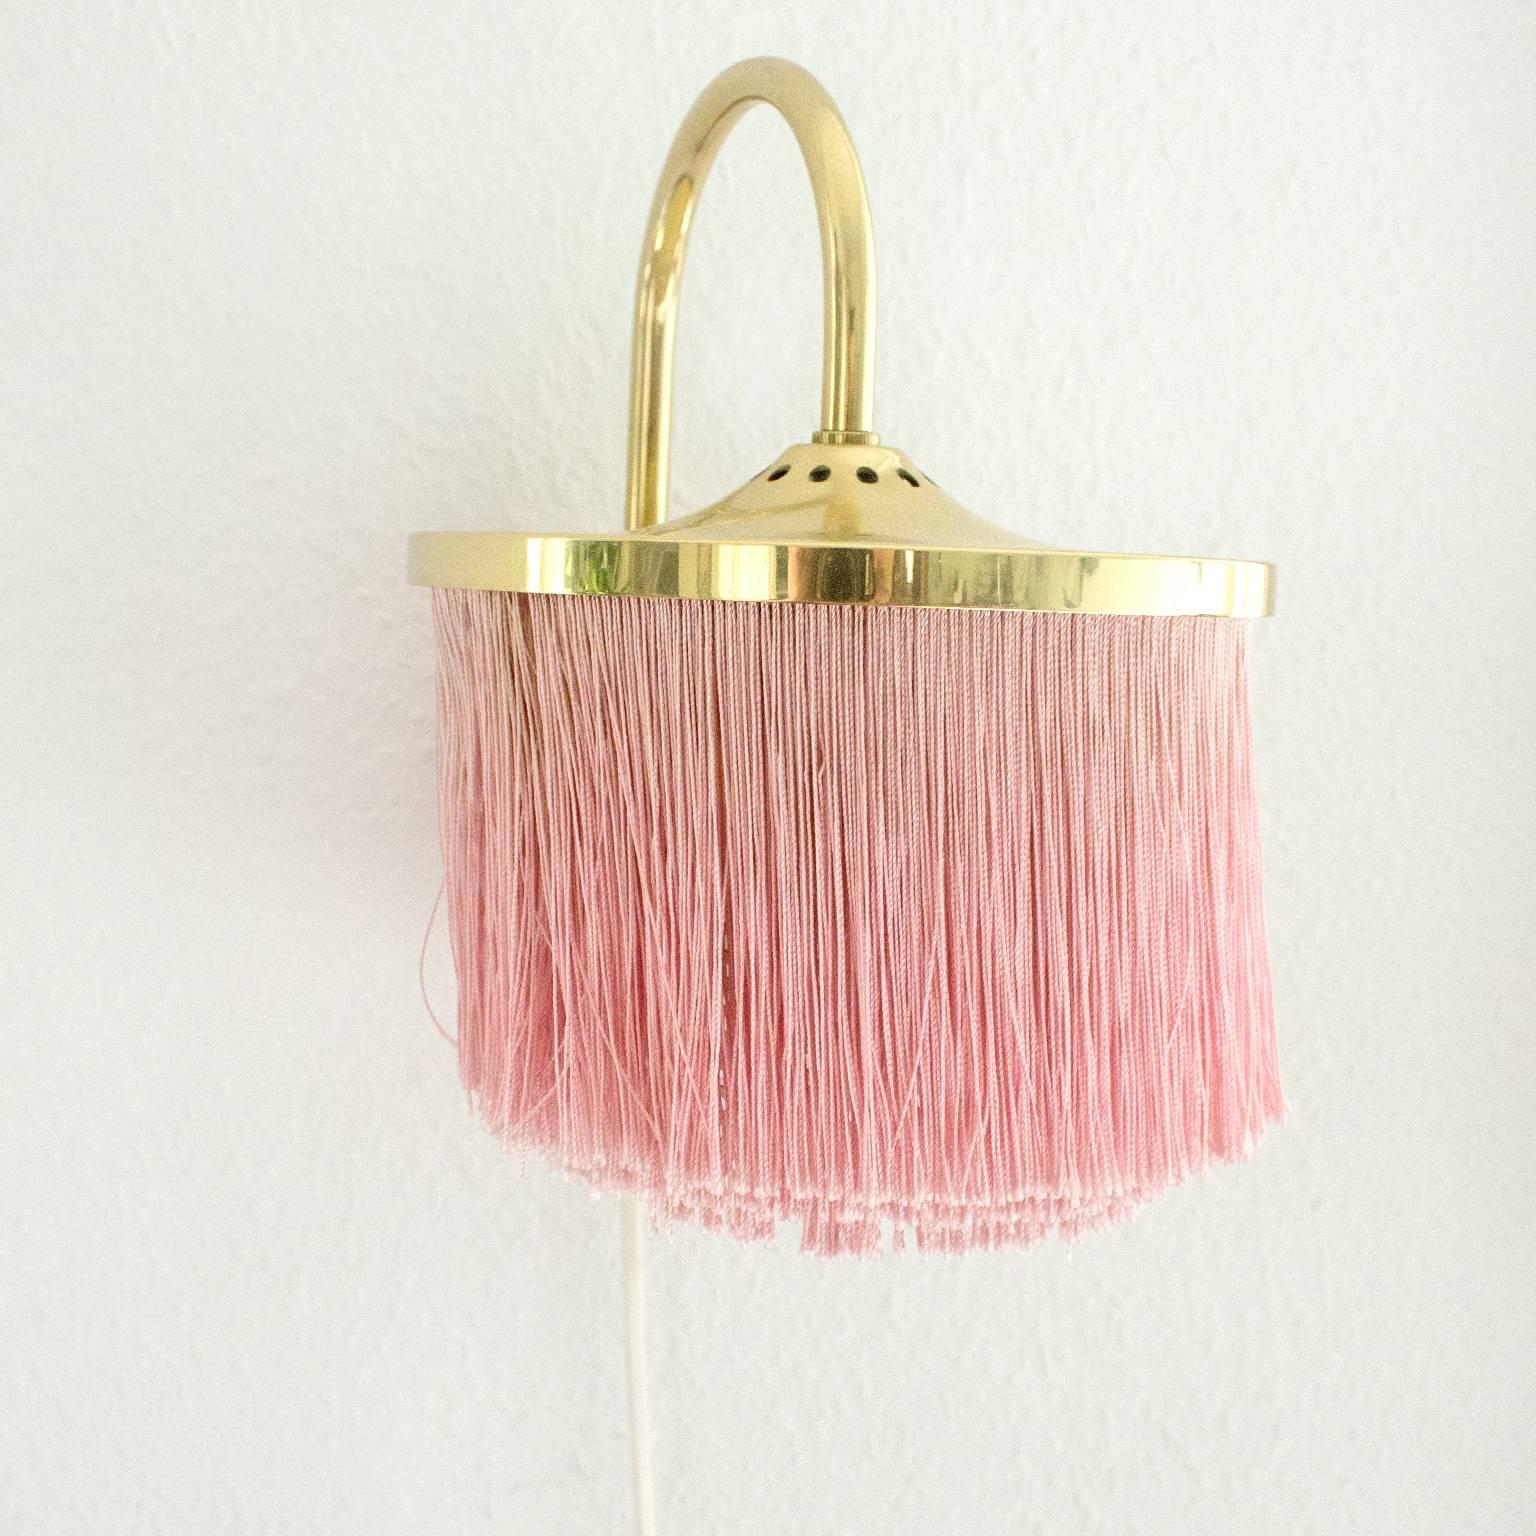 Brass and silk cord fringe wall light by Hans-Agne Jakobsson, Markaryd. Designed in Sweden, circa 1950s. Original cord and plug. Takes one E14 40w maximum bulb.